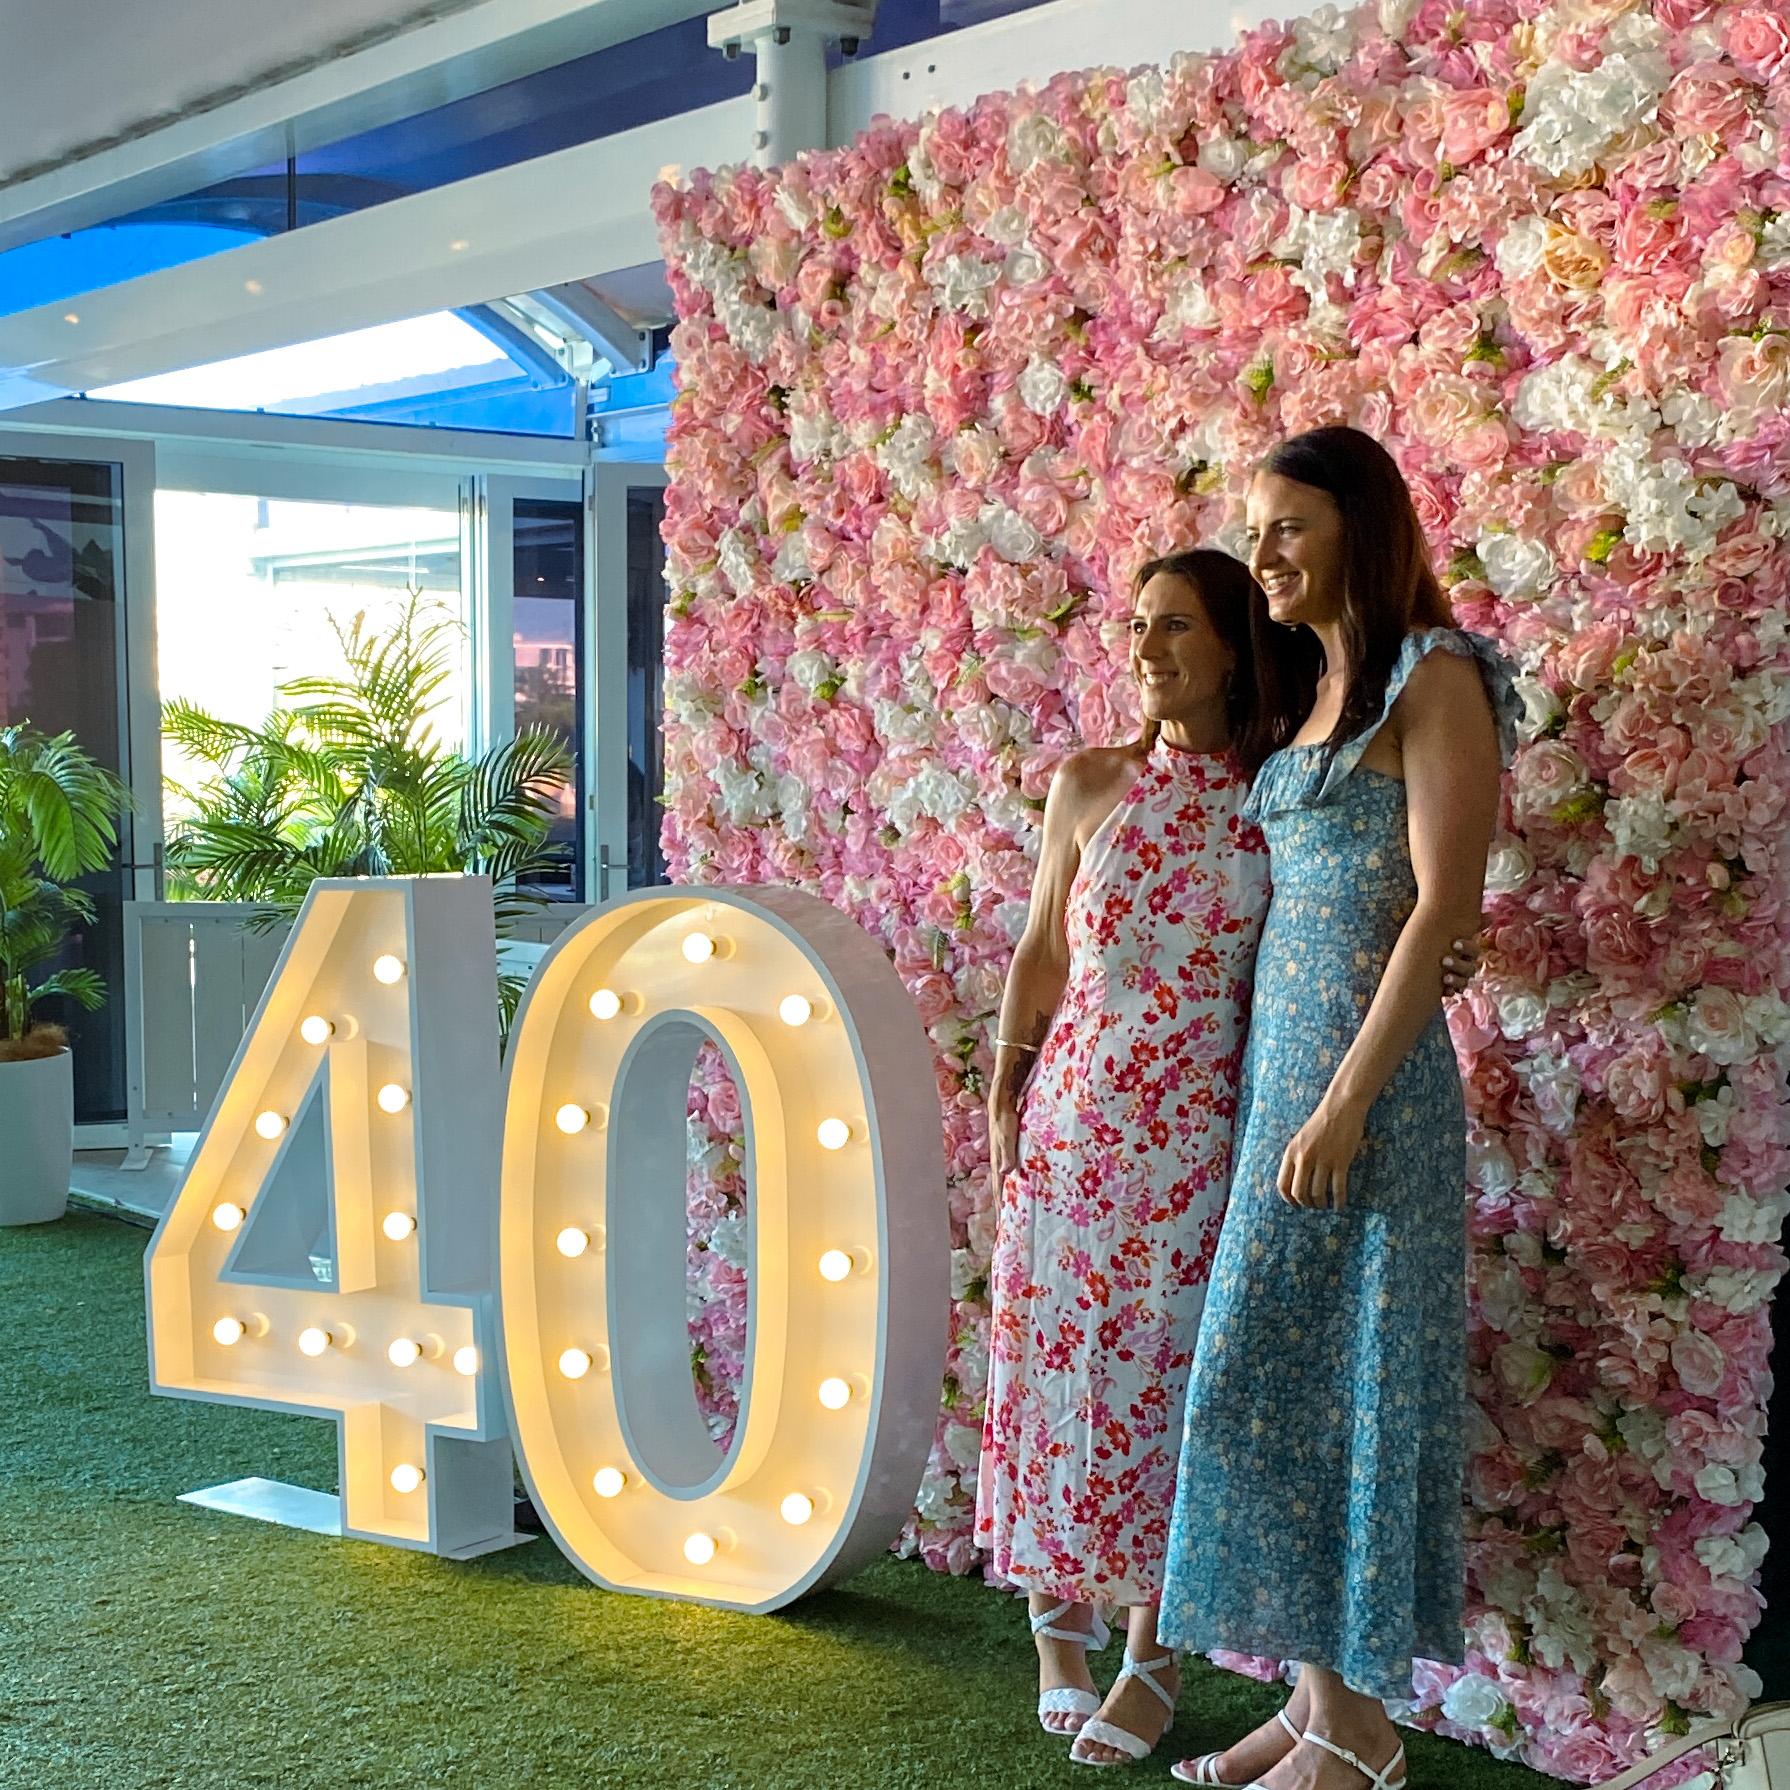 40 light up numbers